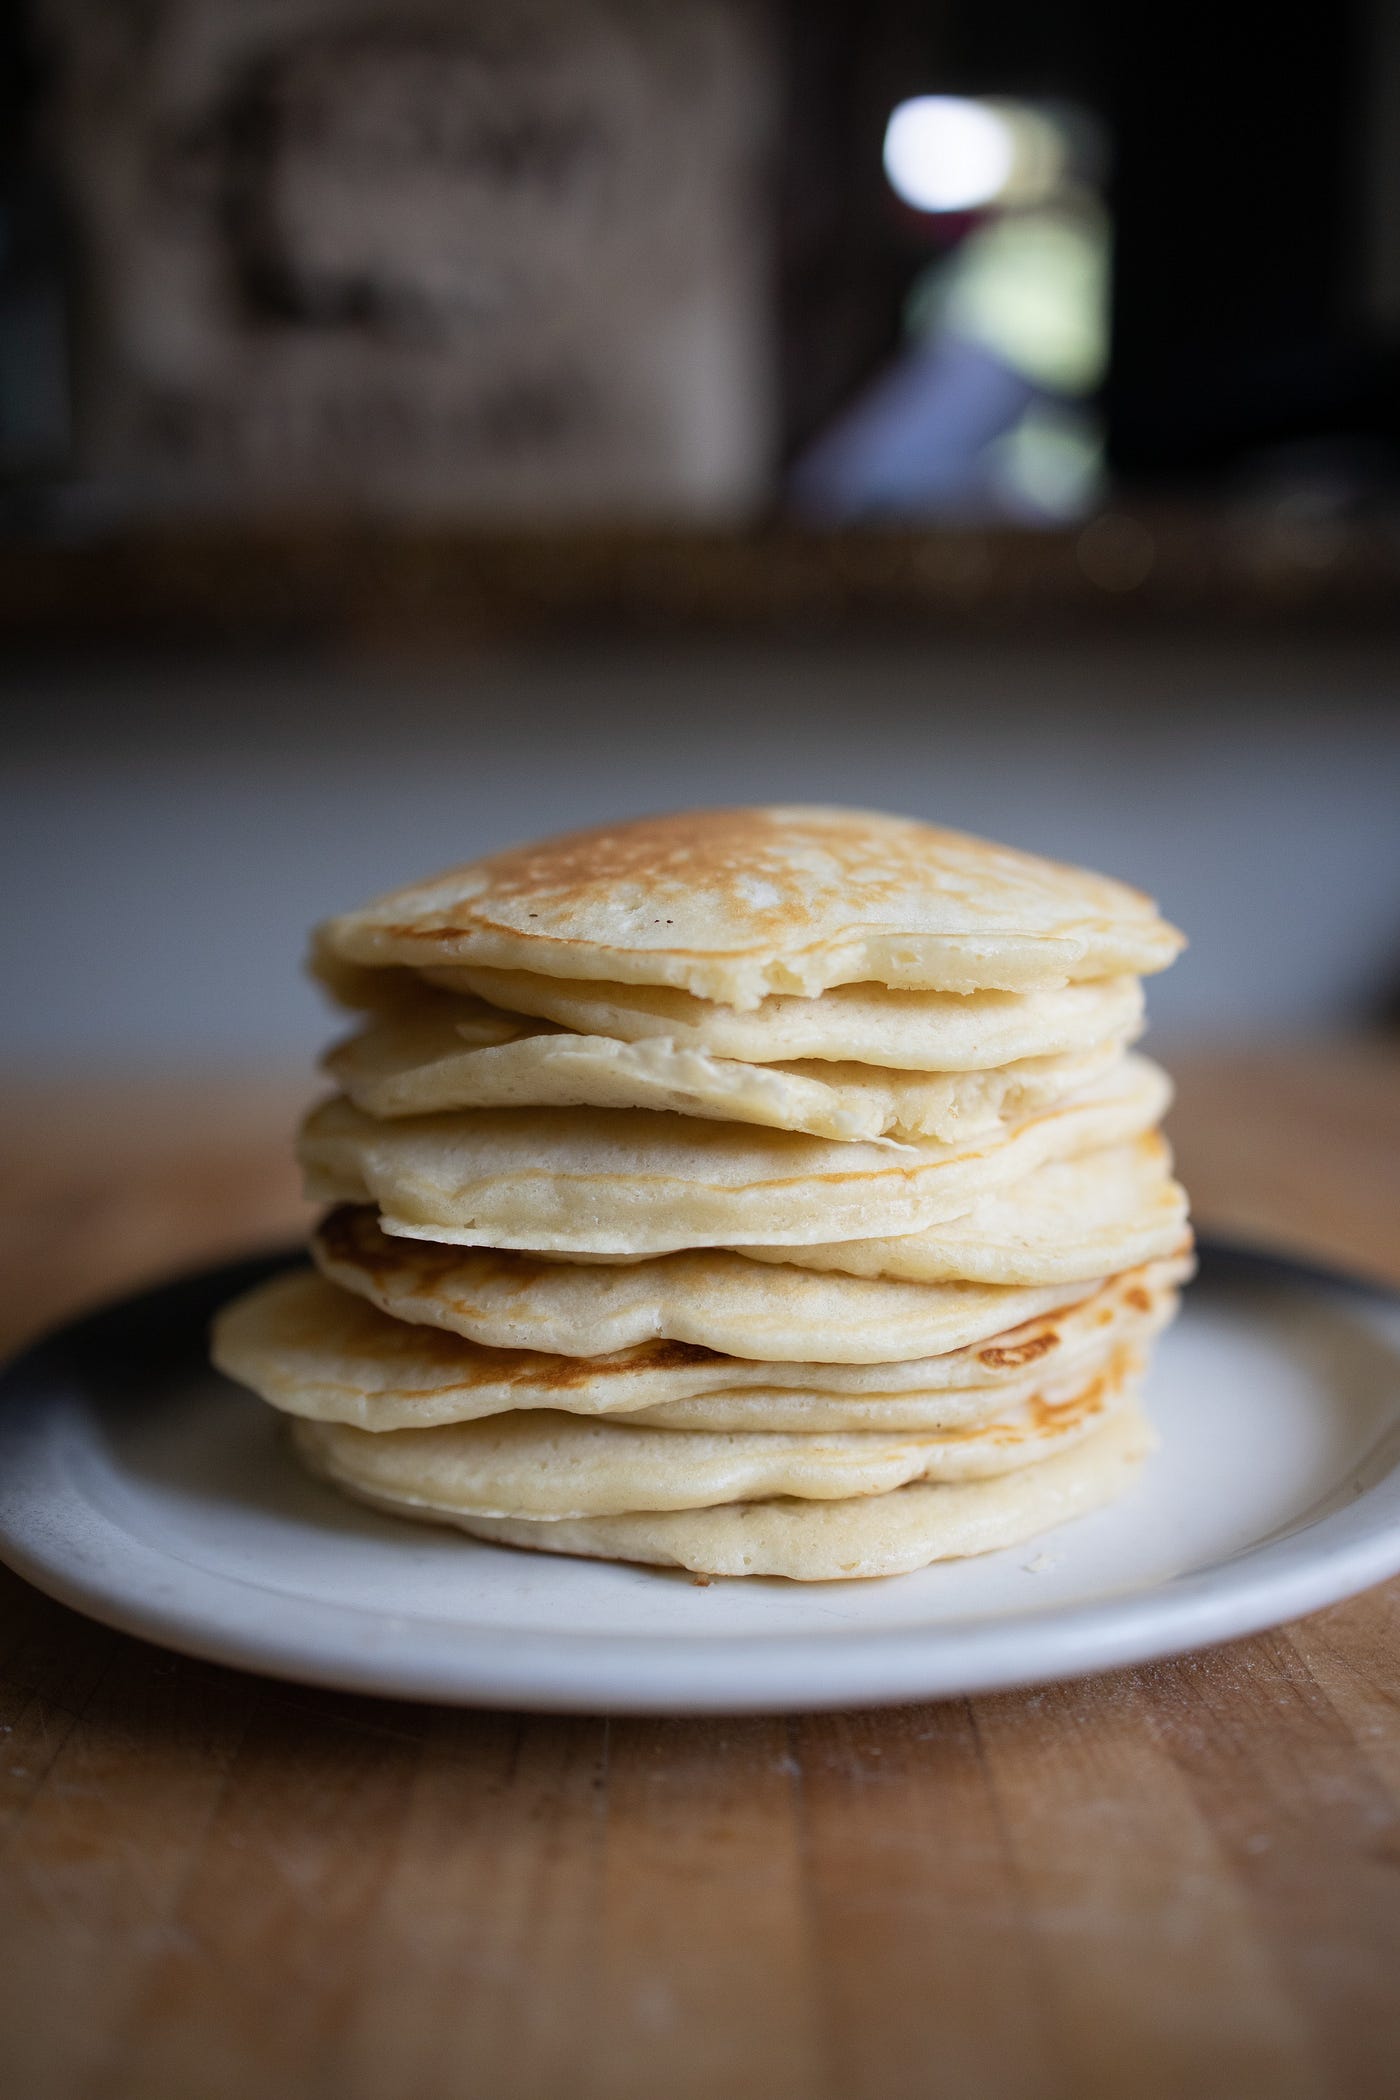 A stack of pancakes on a wooden countertop.